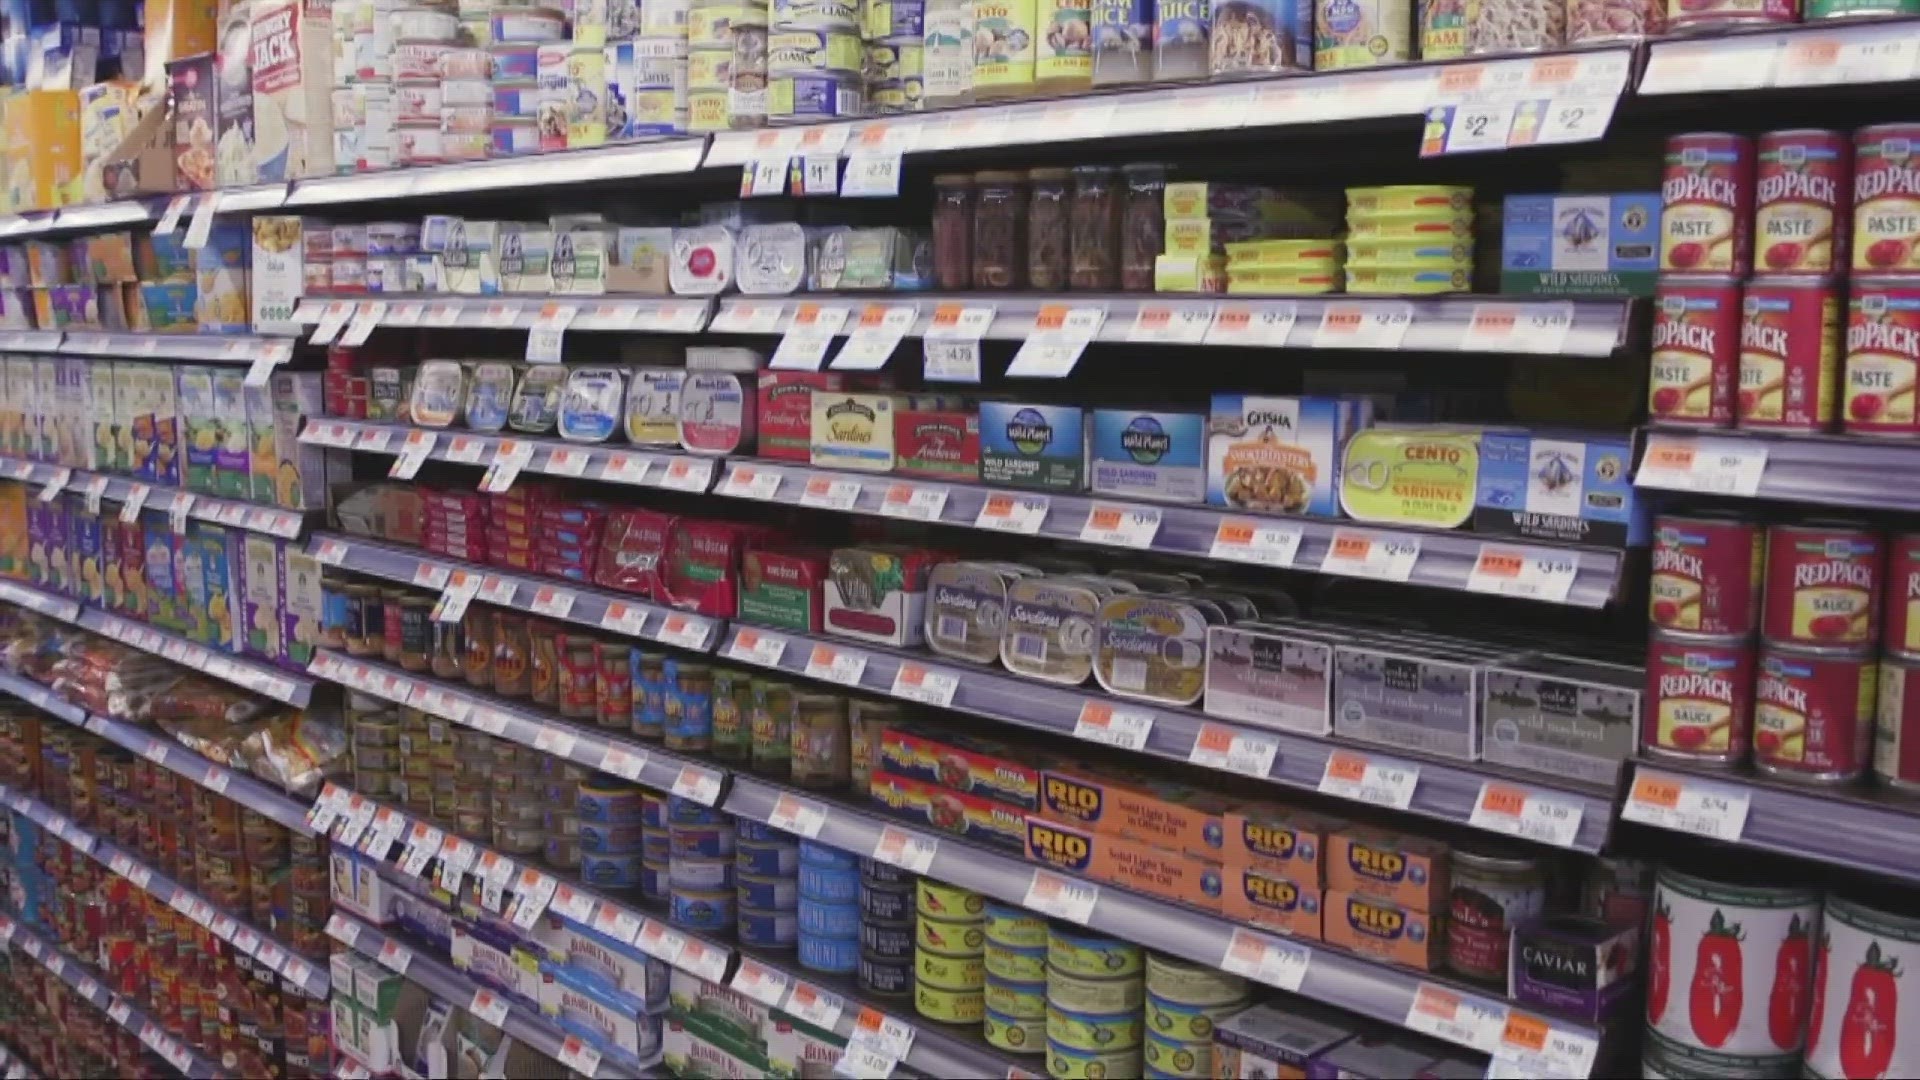 Consumer Reports gives us the skinny on what those label claims really mean.